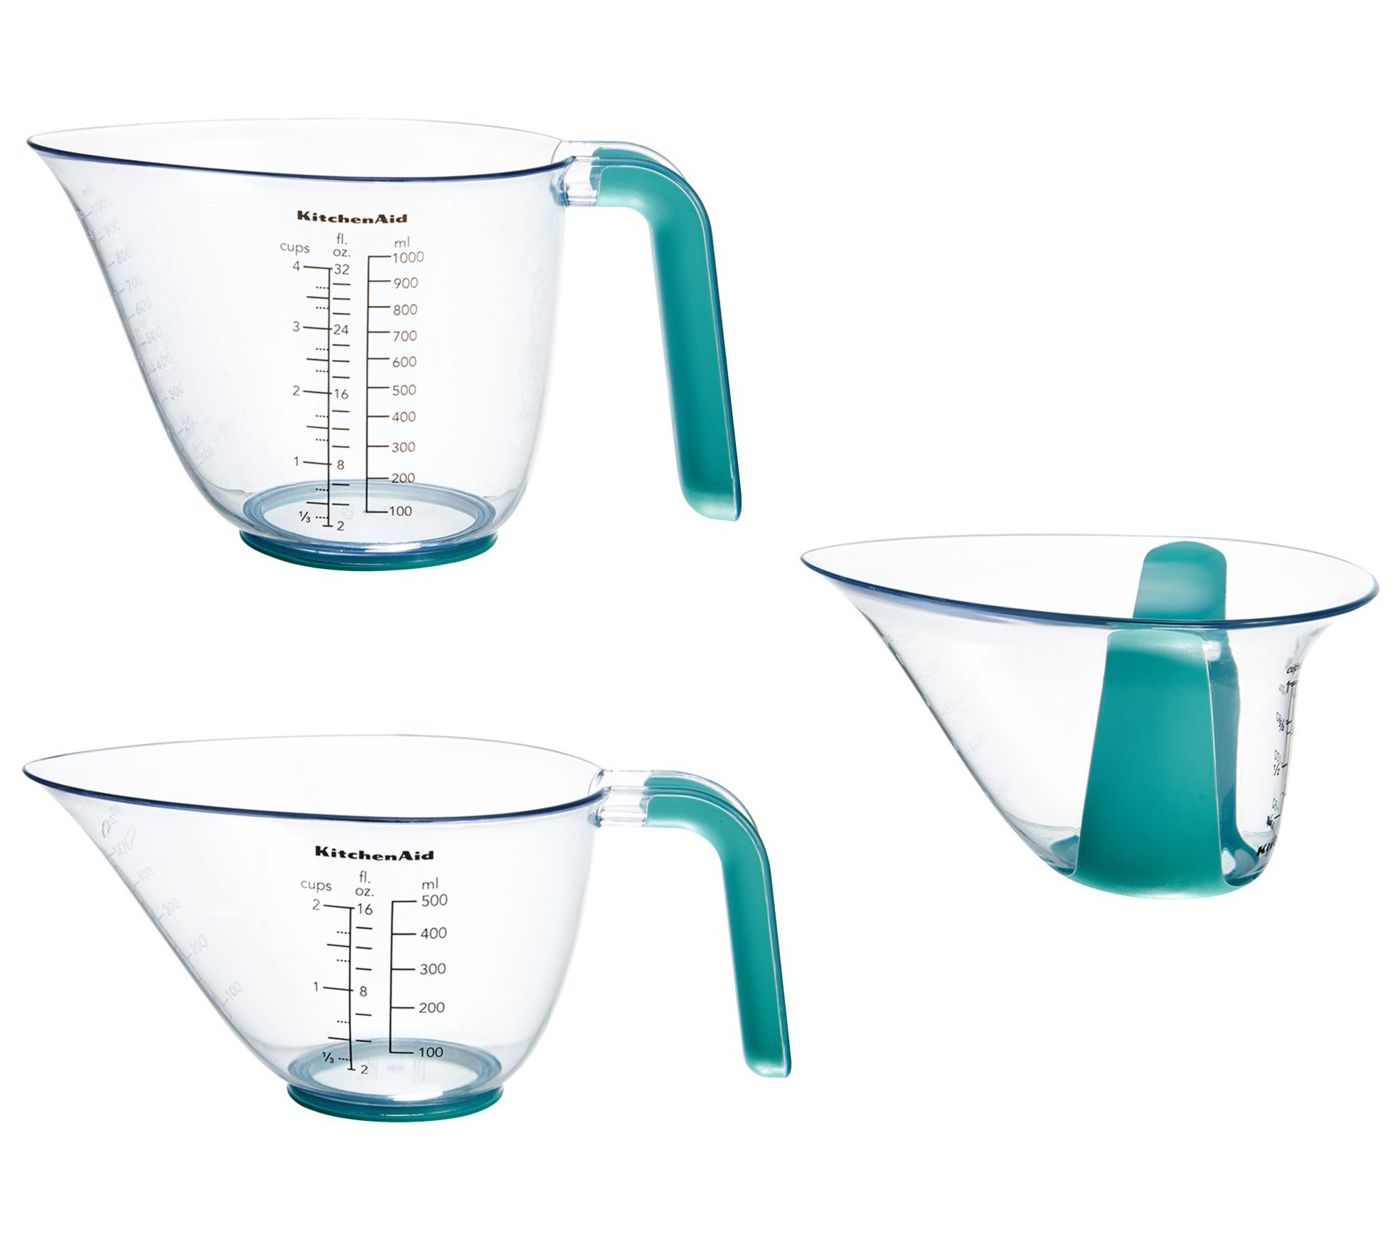 KitchenAid Gadgets Anniv Measuring Cup and Spoon Set